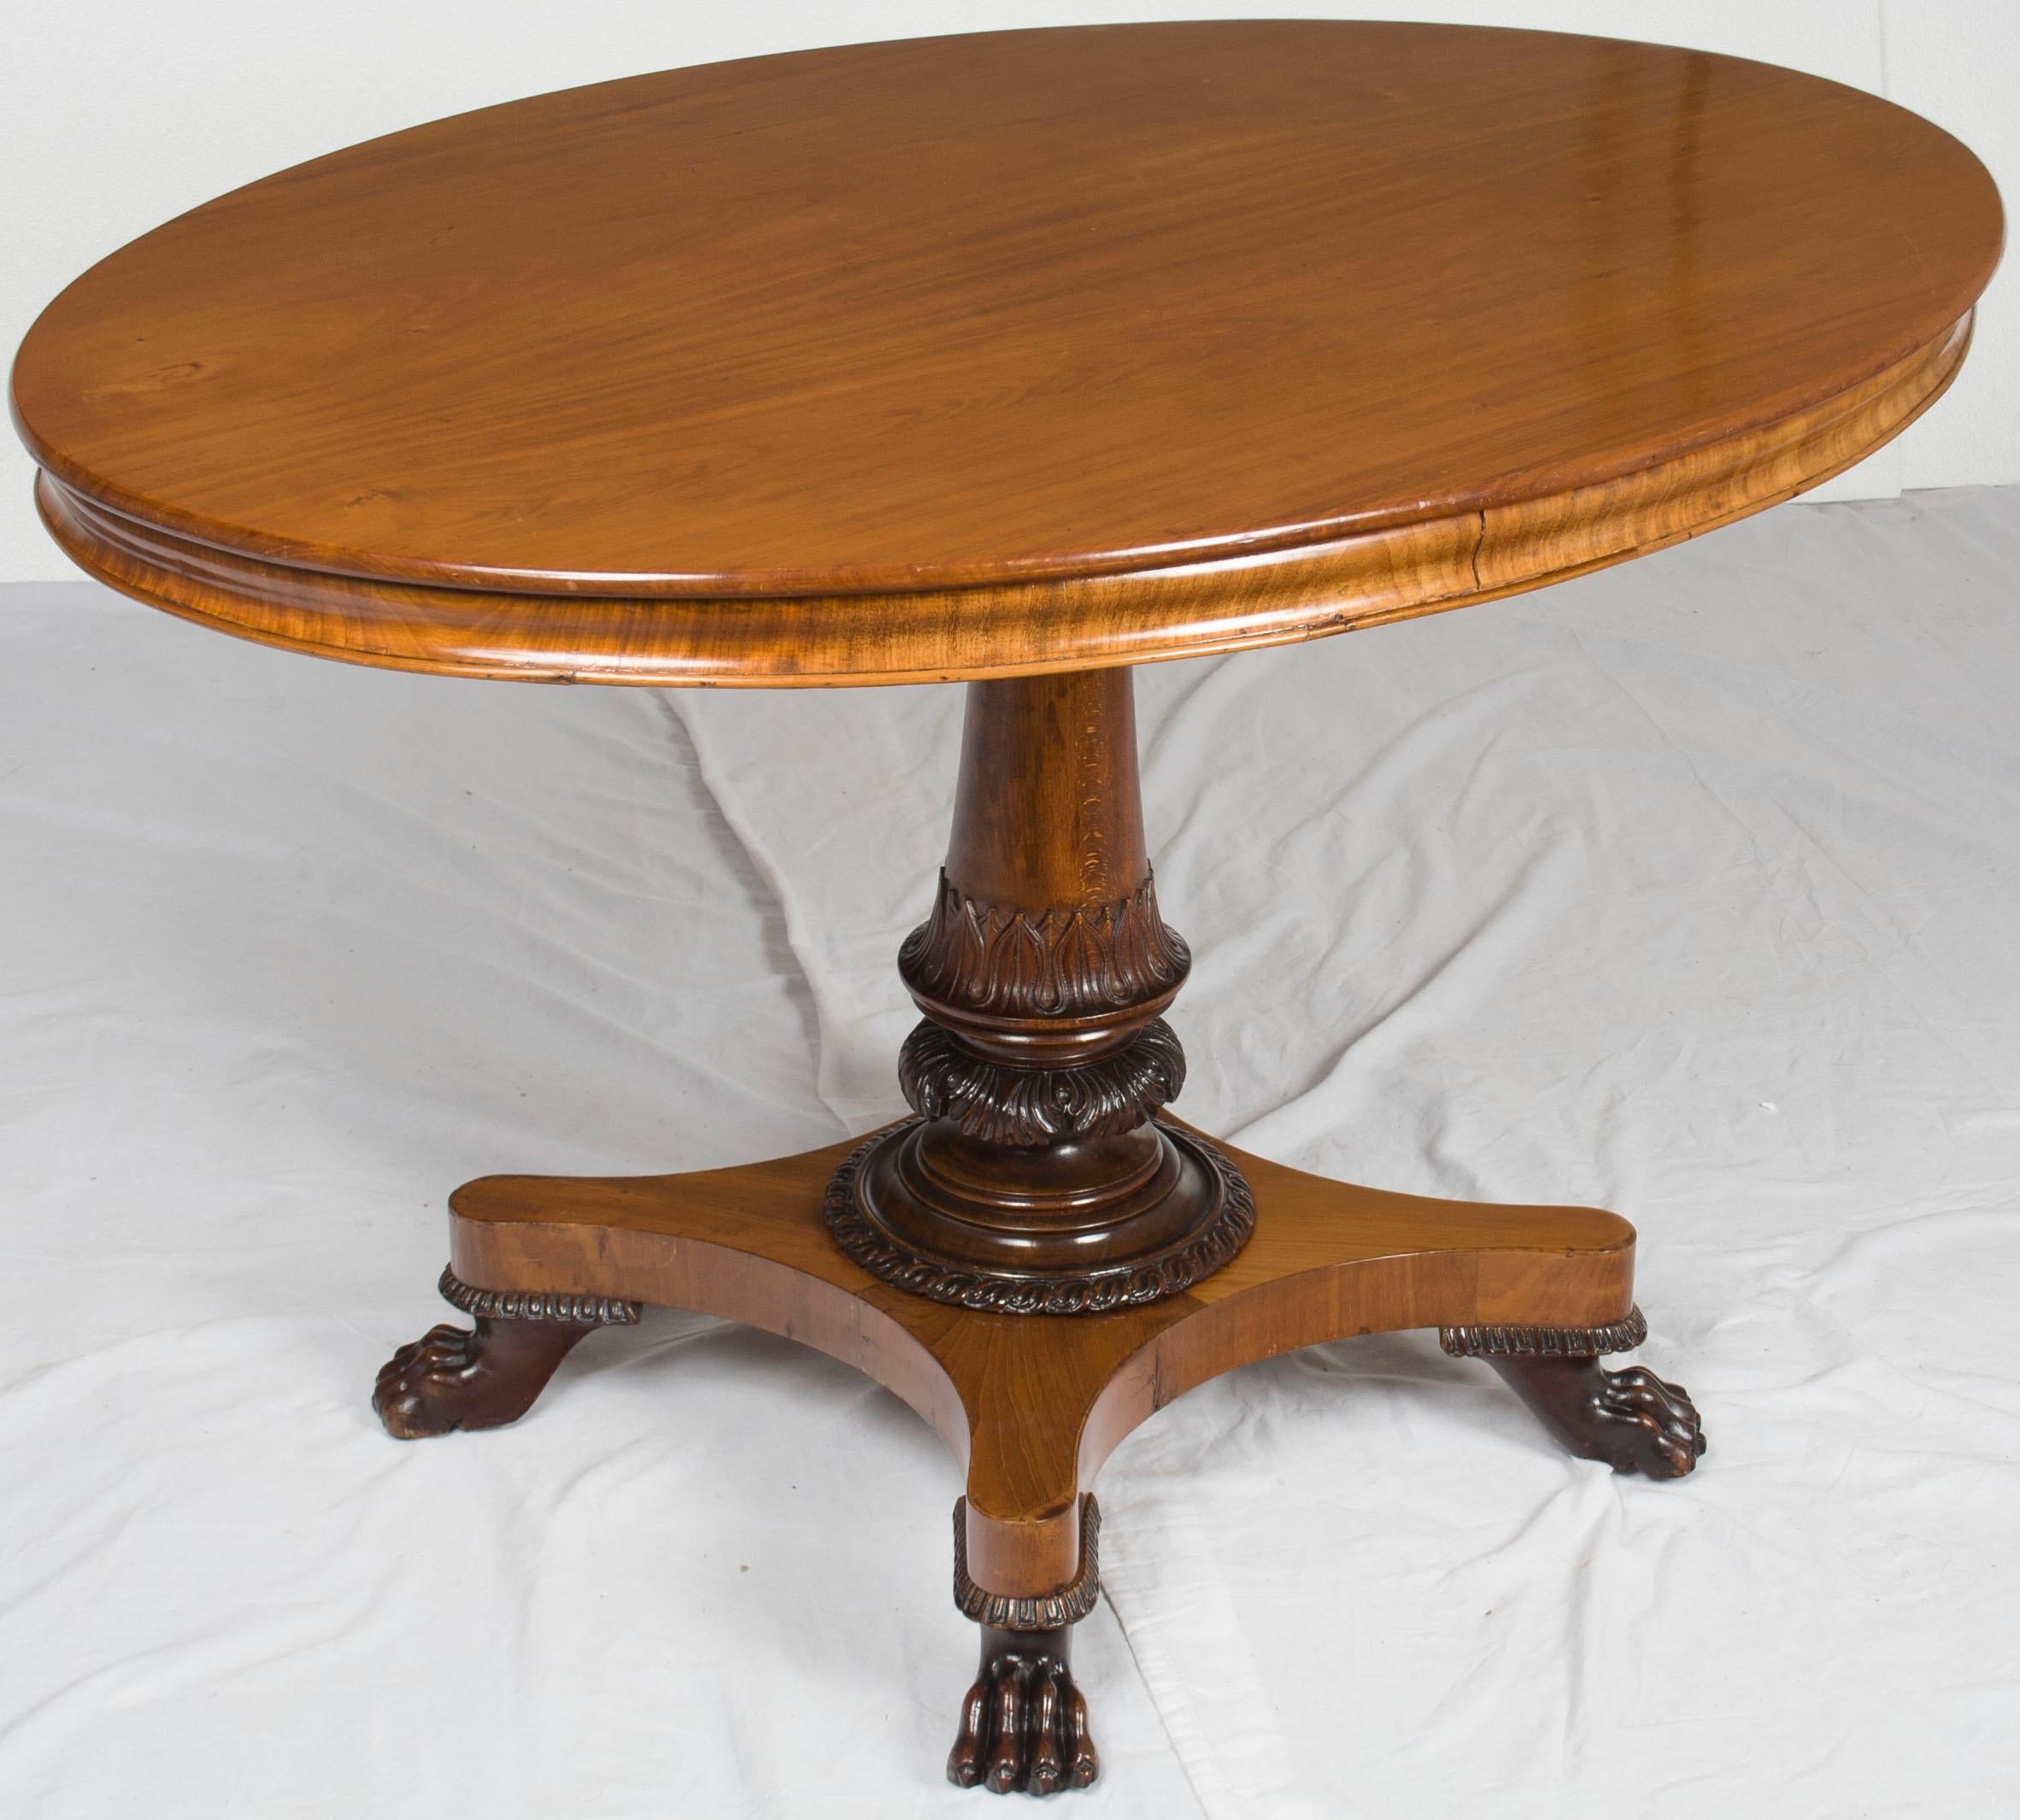 Mahogany and Oak Empire Style Large Oval Center Foyer Table Claw Foot Pedestal im Angebot 2